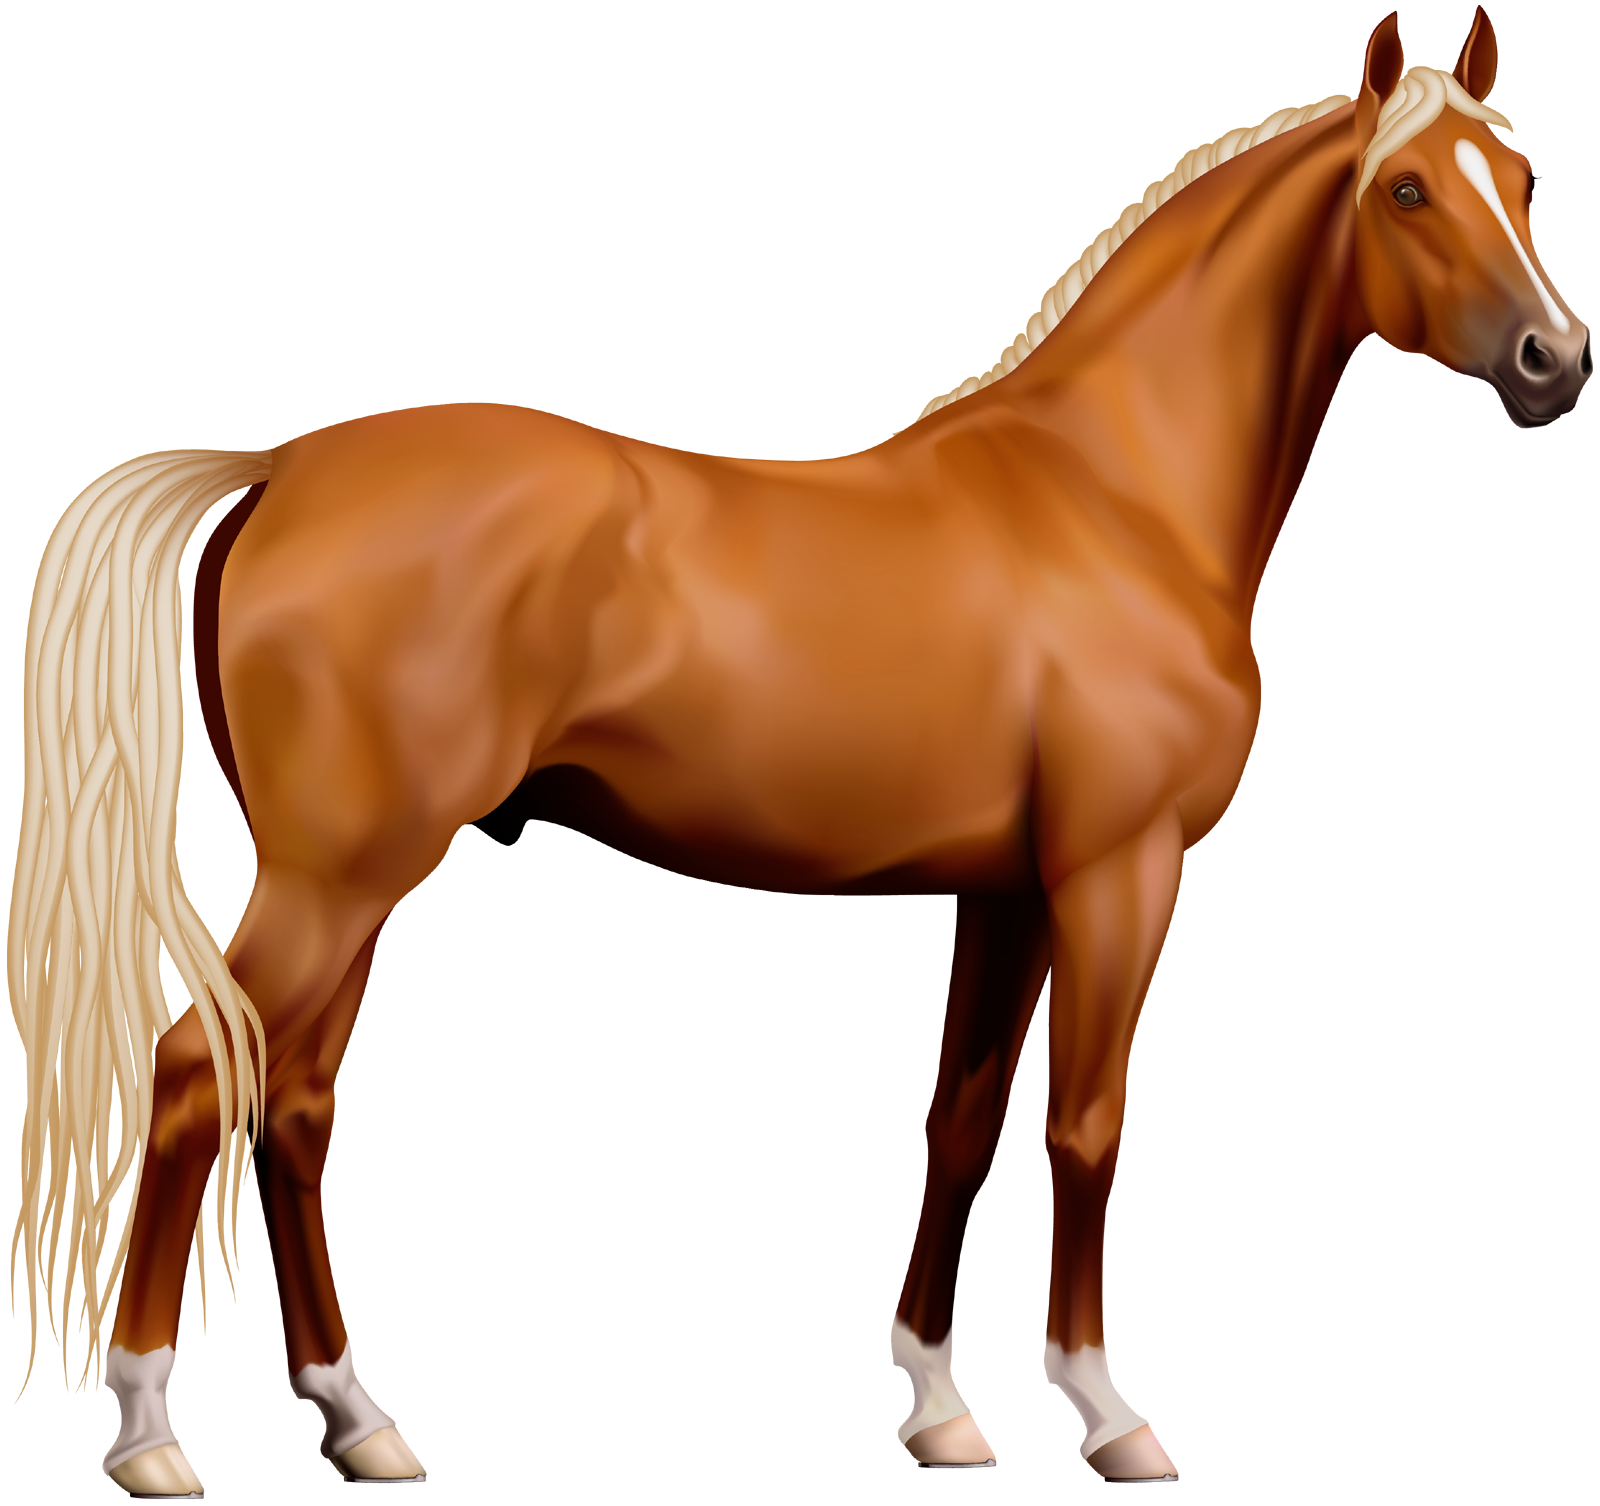 Horse png images free. Horses clipart colourful